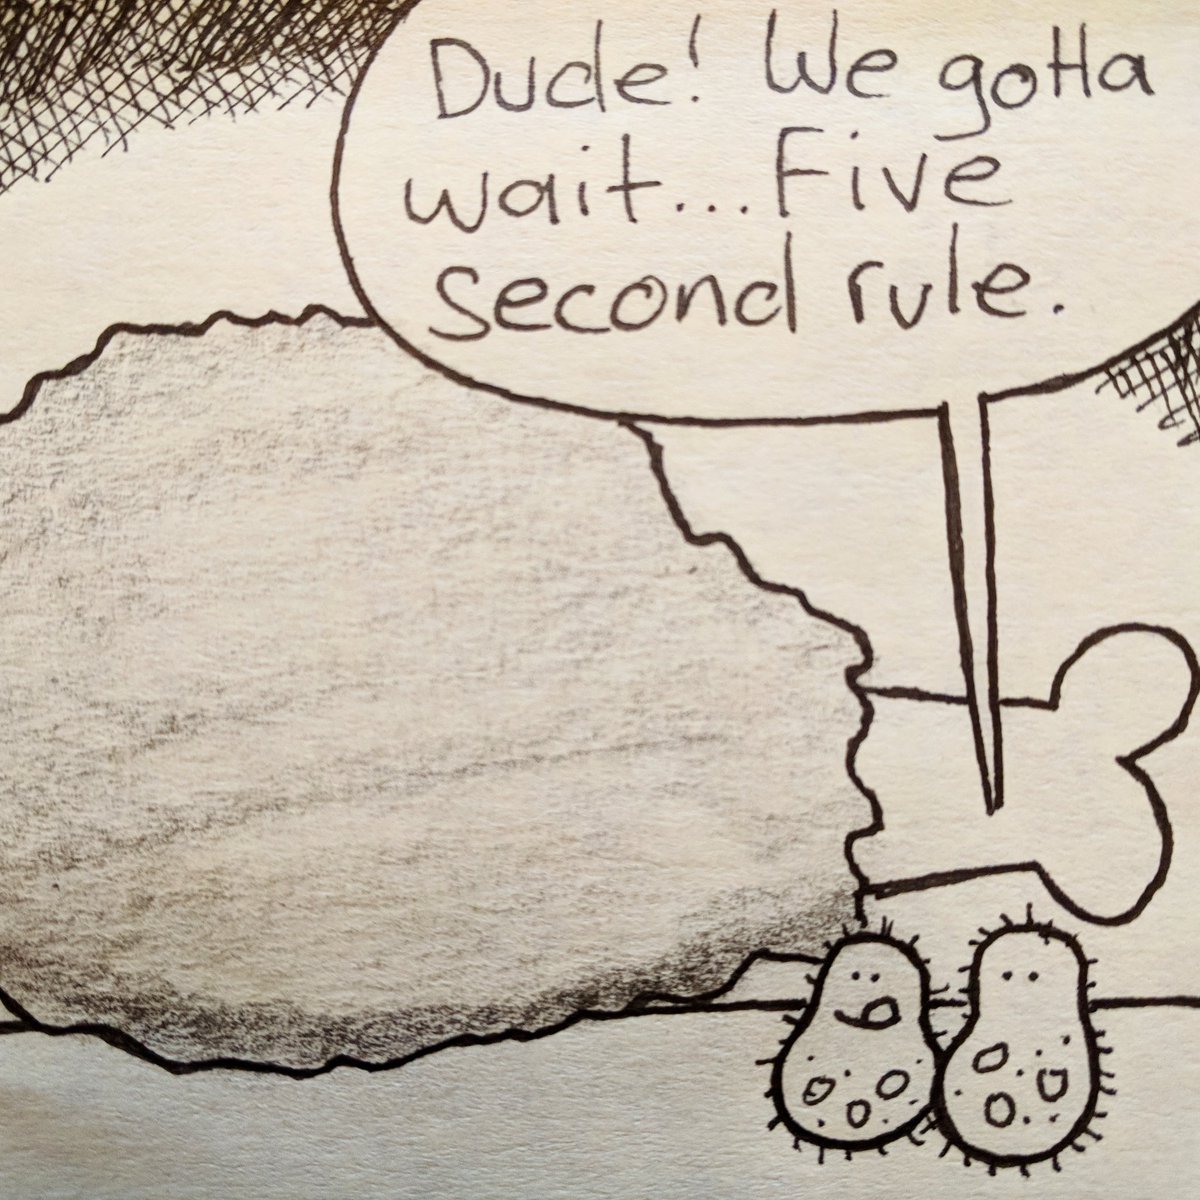 *Germs shown may not be actual size.
#dailydoodle #funny #comic #fivesecondrule #germs